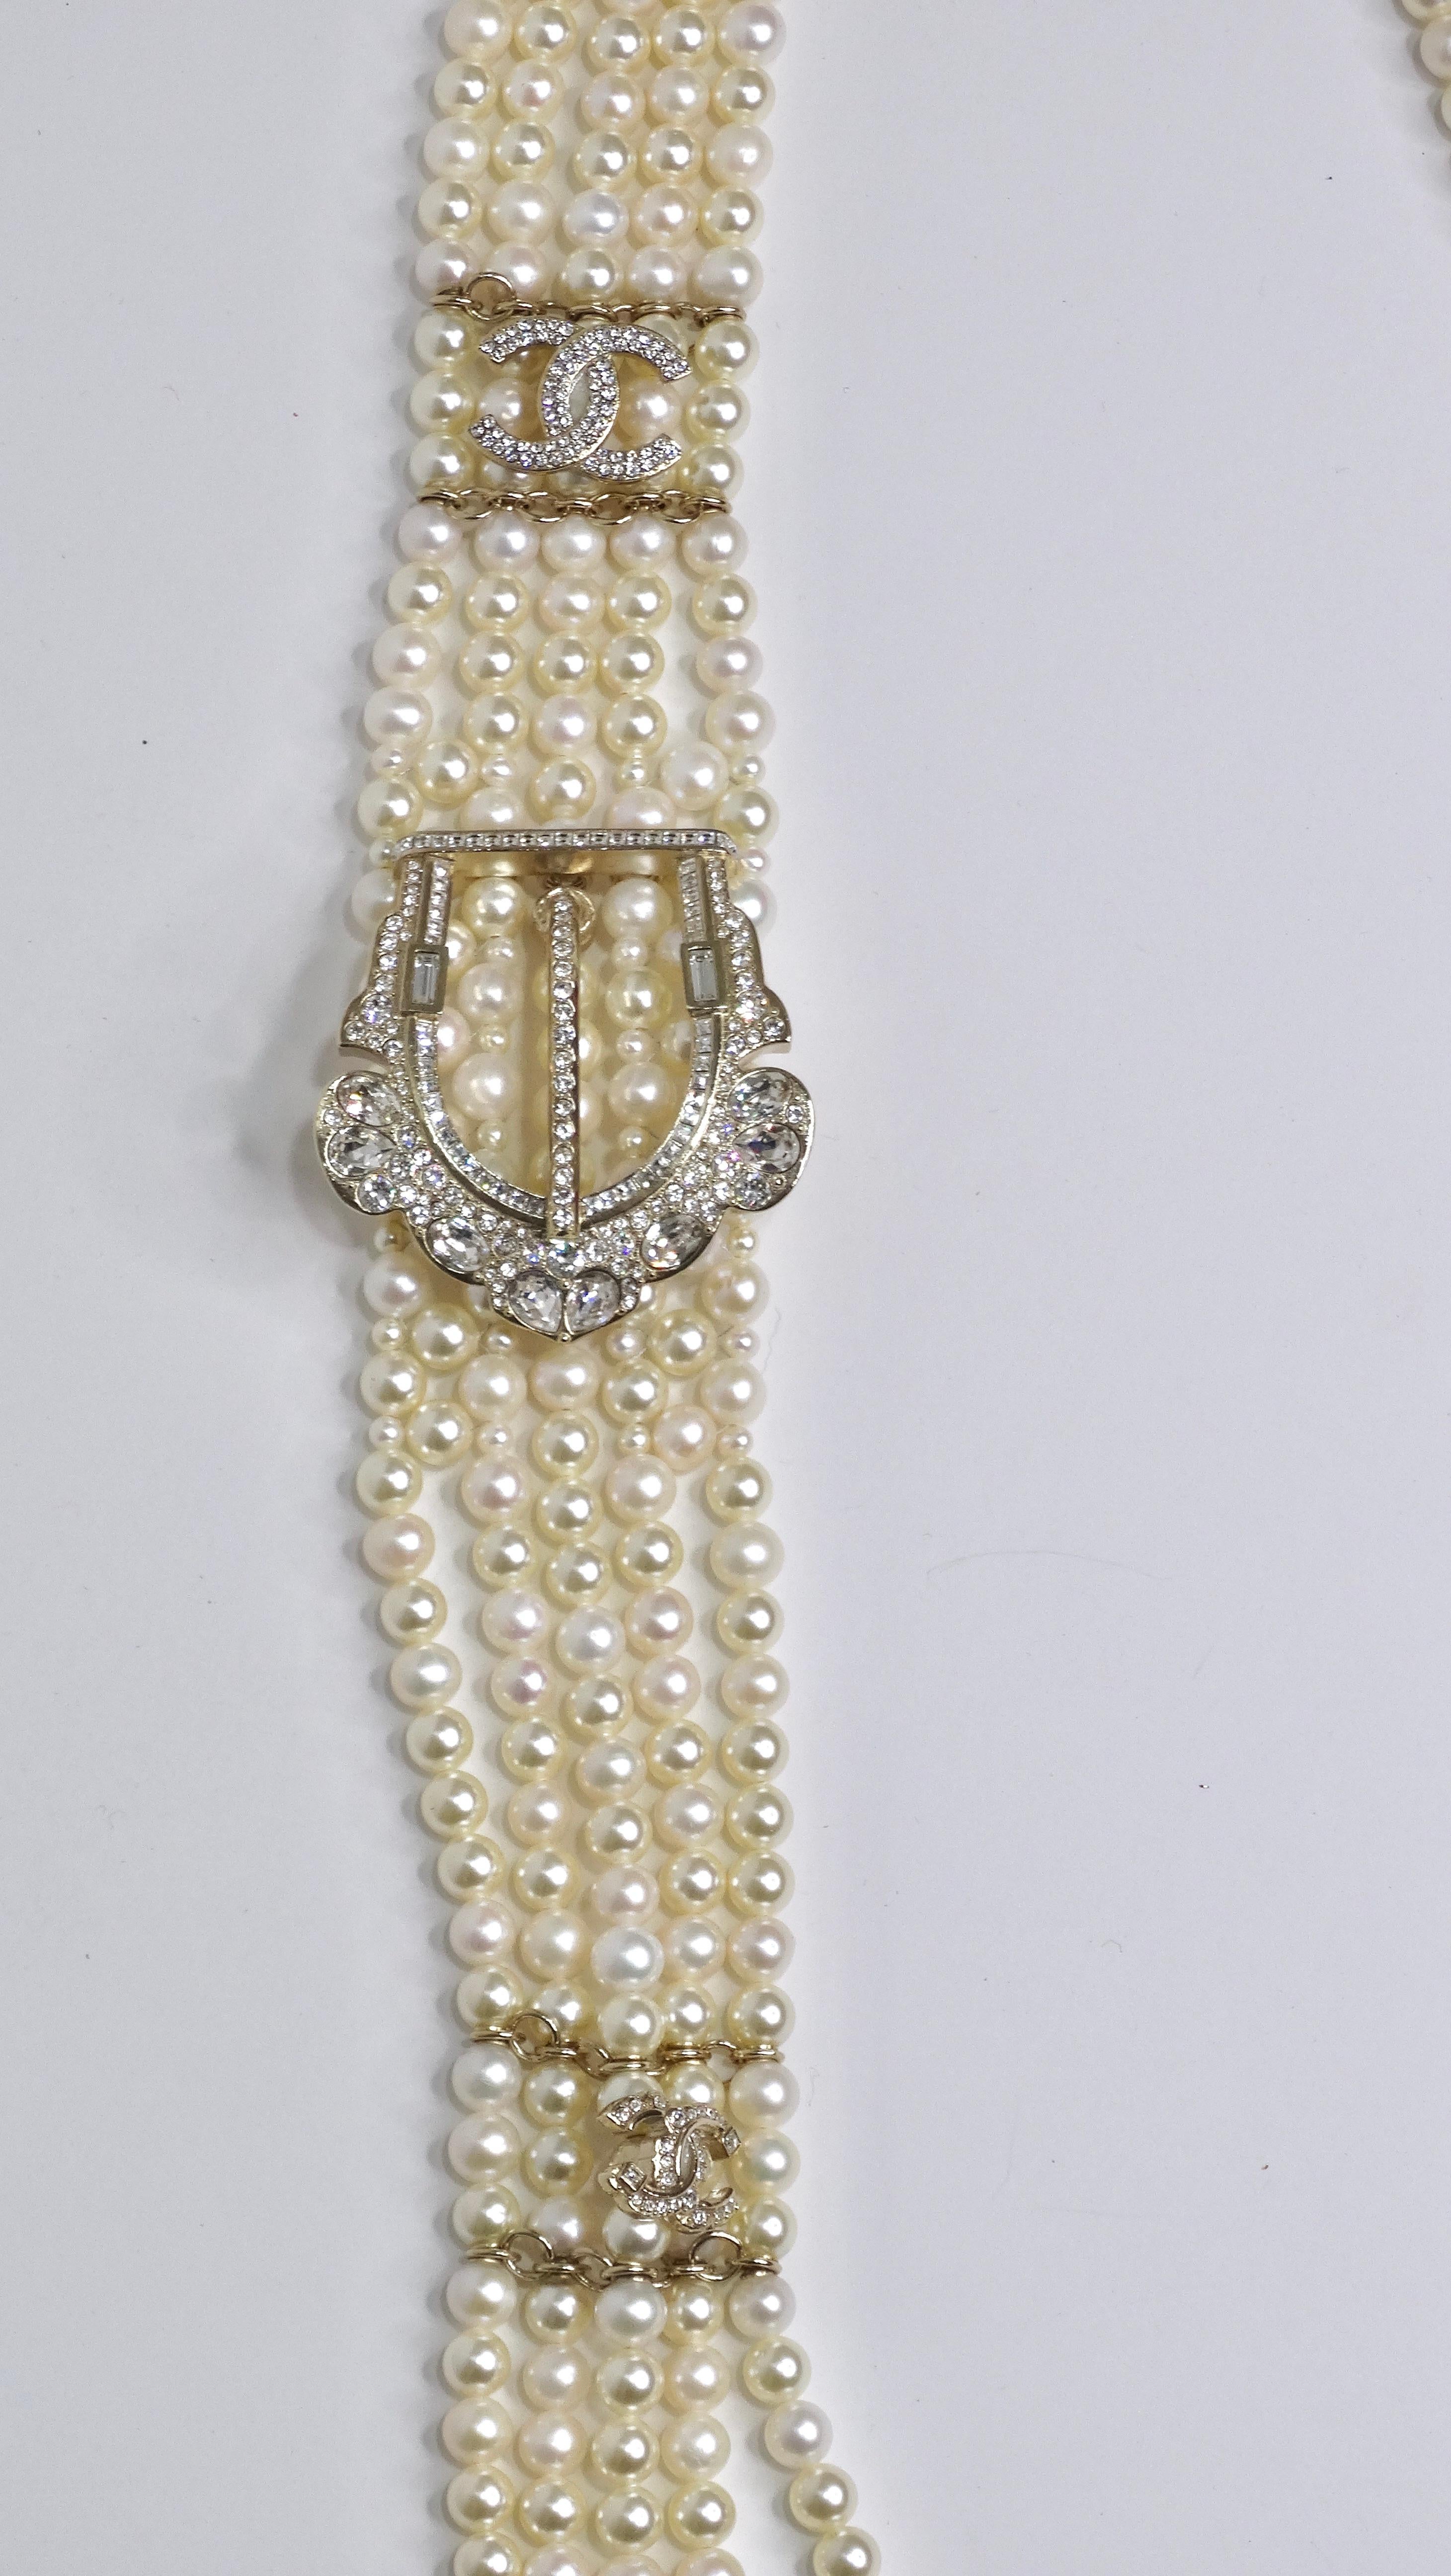 Chanel Pearls & Crystal Buckle Multi-Strand Necklace In Excellent Condition For Sale In Scottsdale, AZ